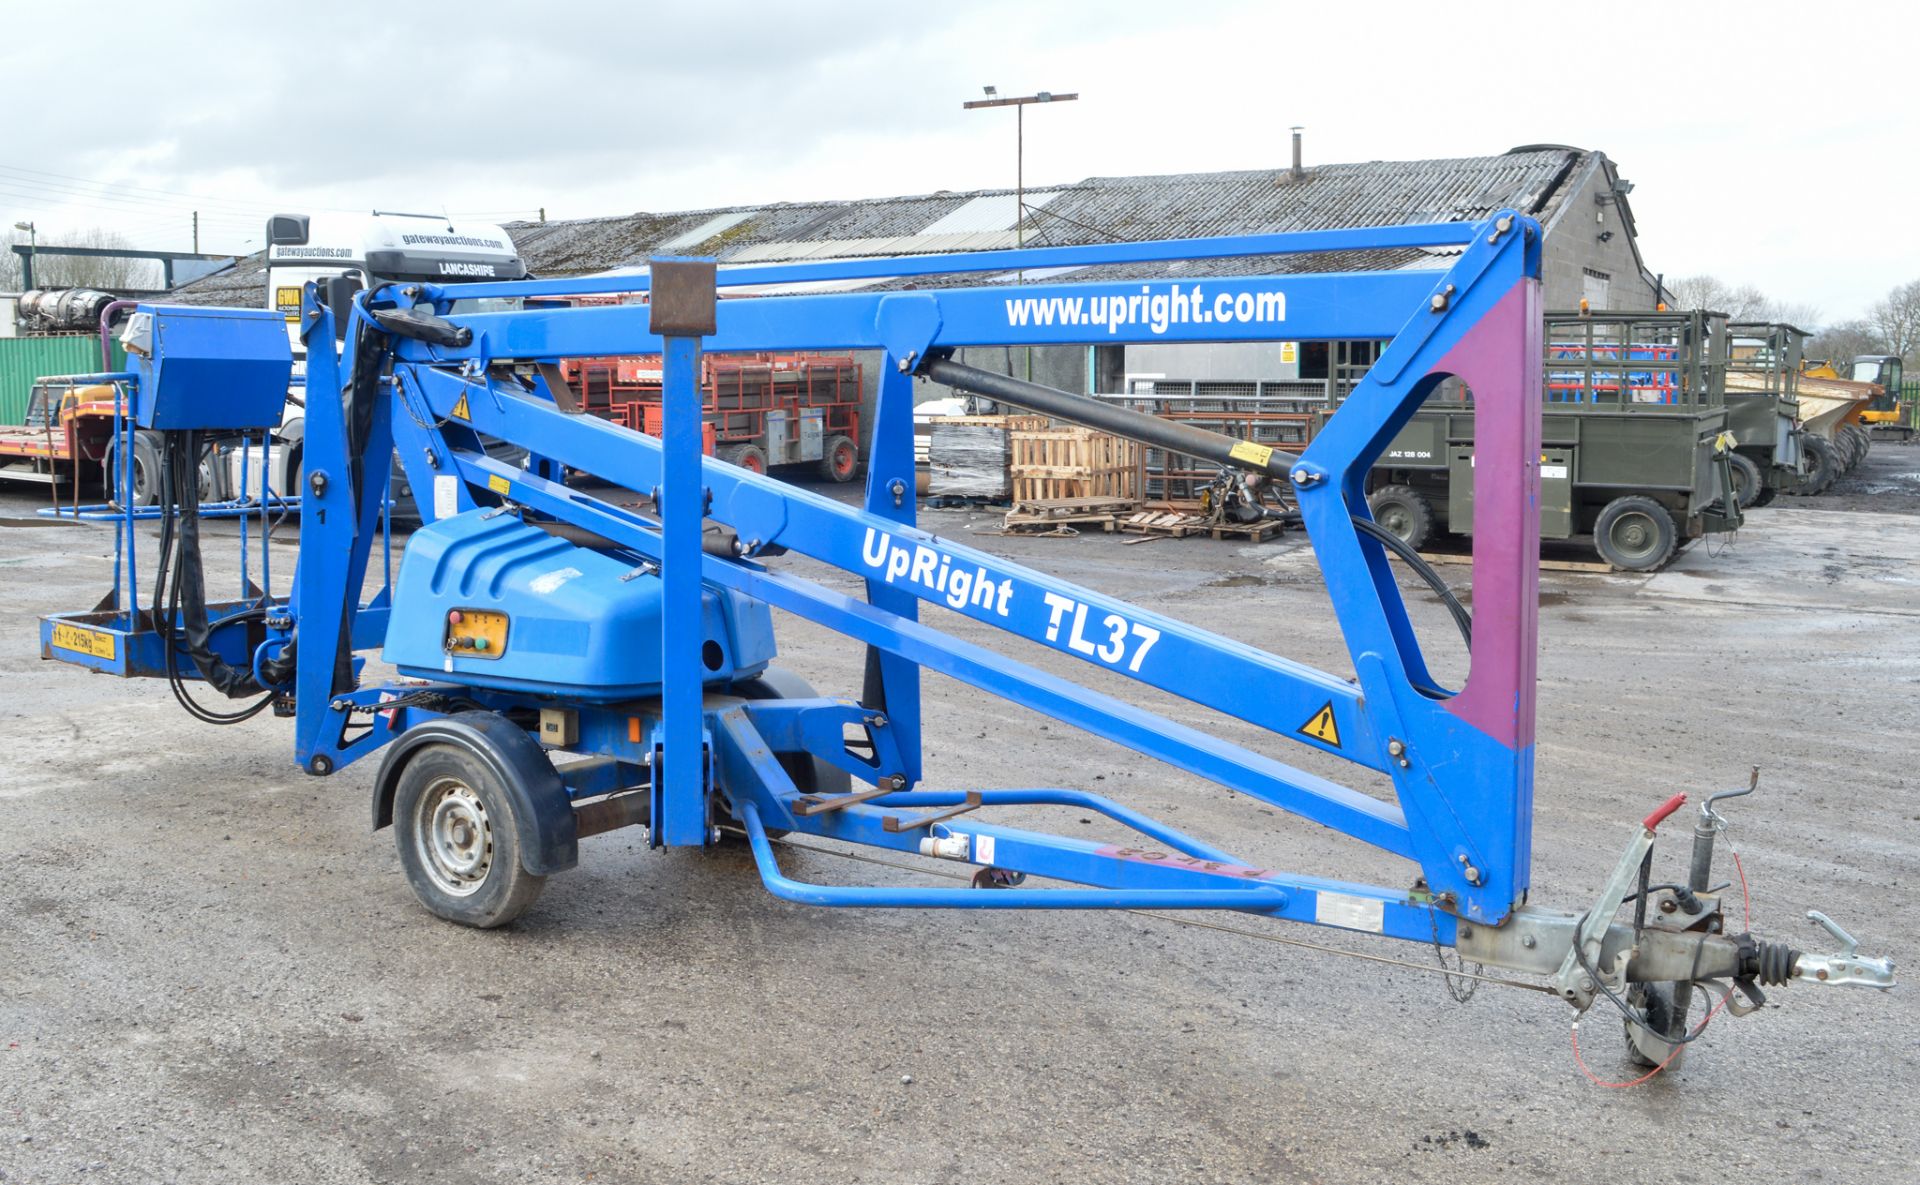 Upright TL37 13 metre battery electric trailer mounted articulated boom access platform Year: 2007 - Image 2 of 8